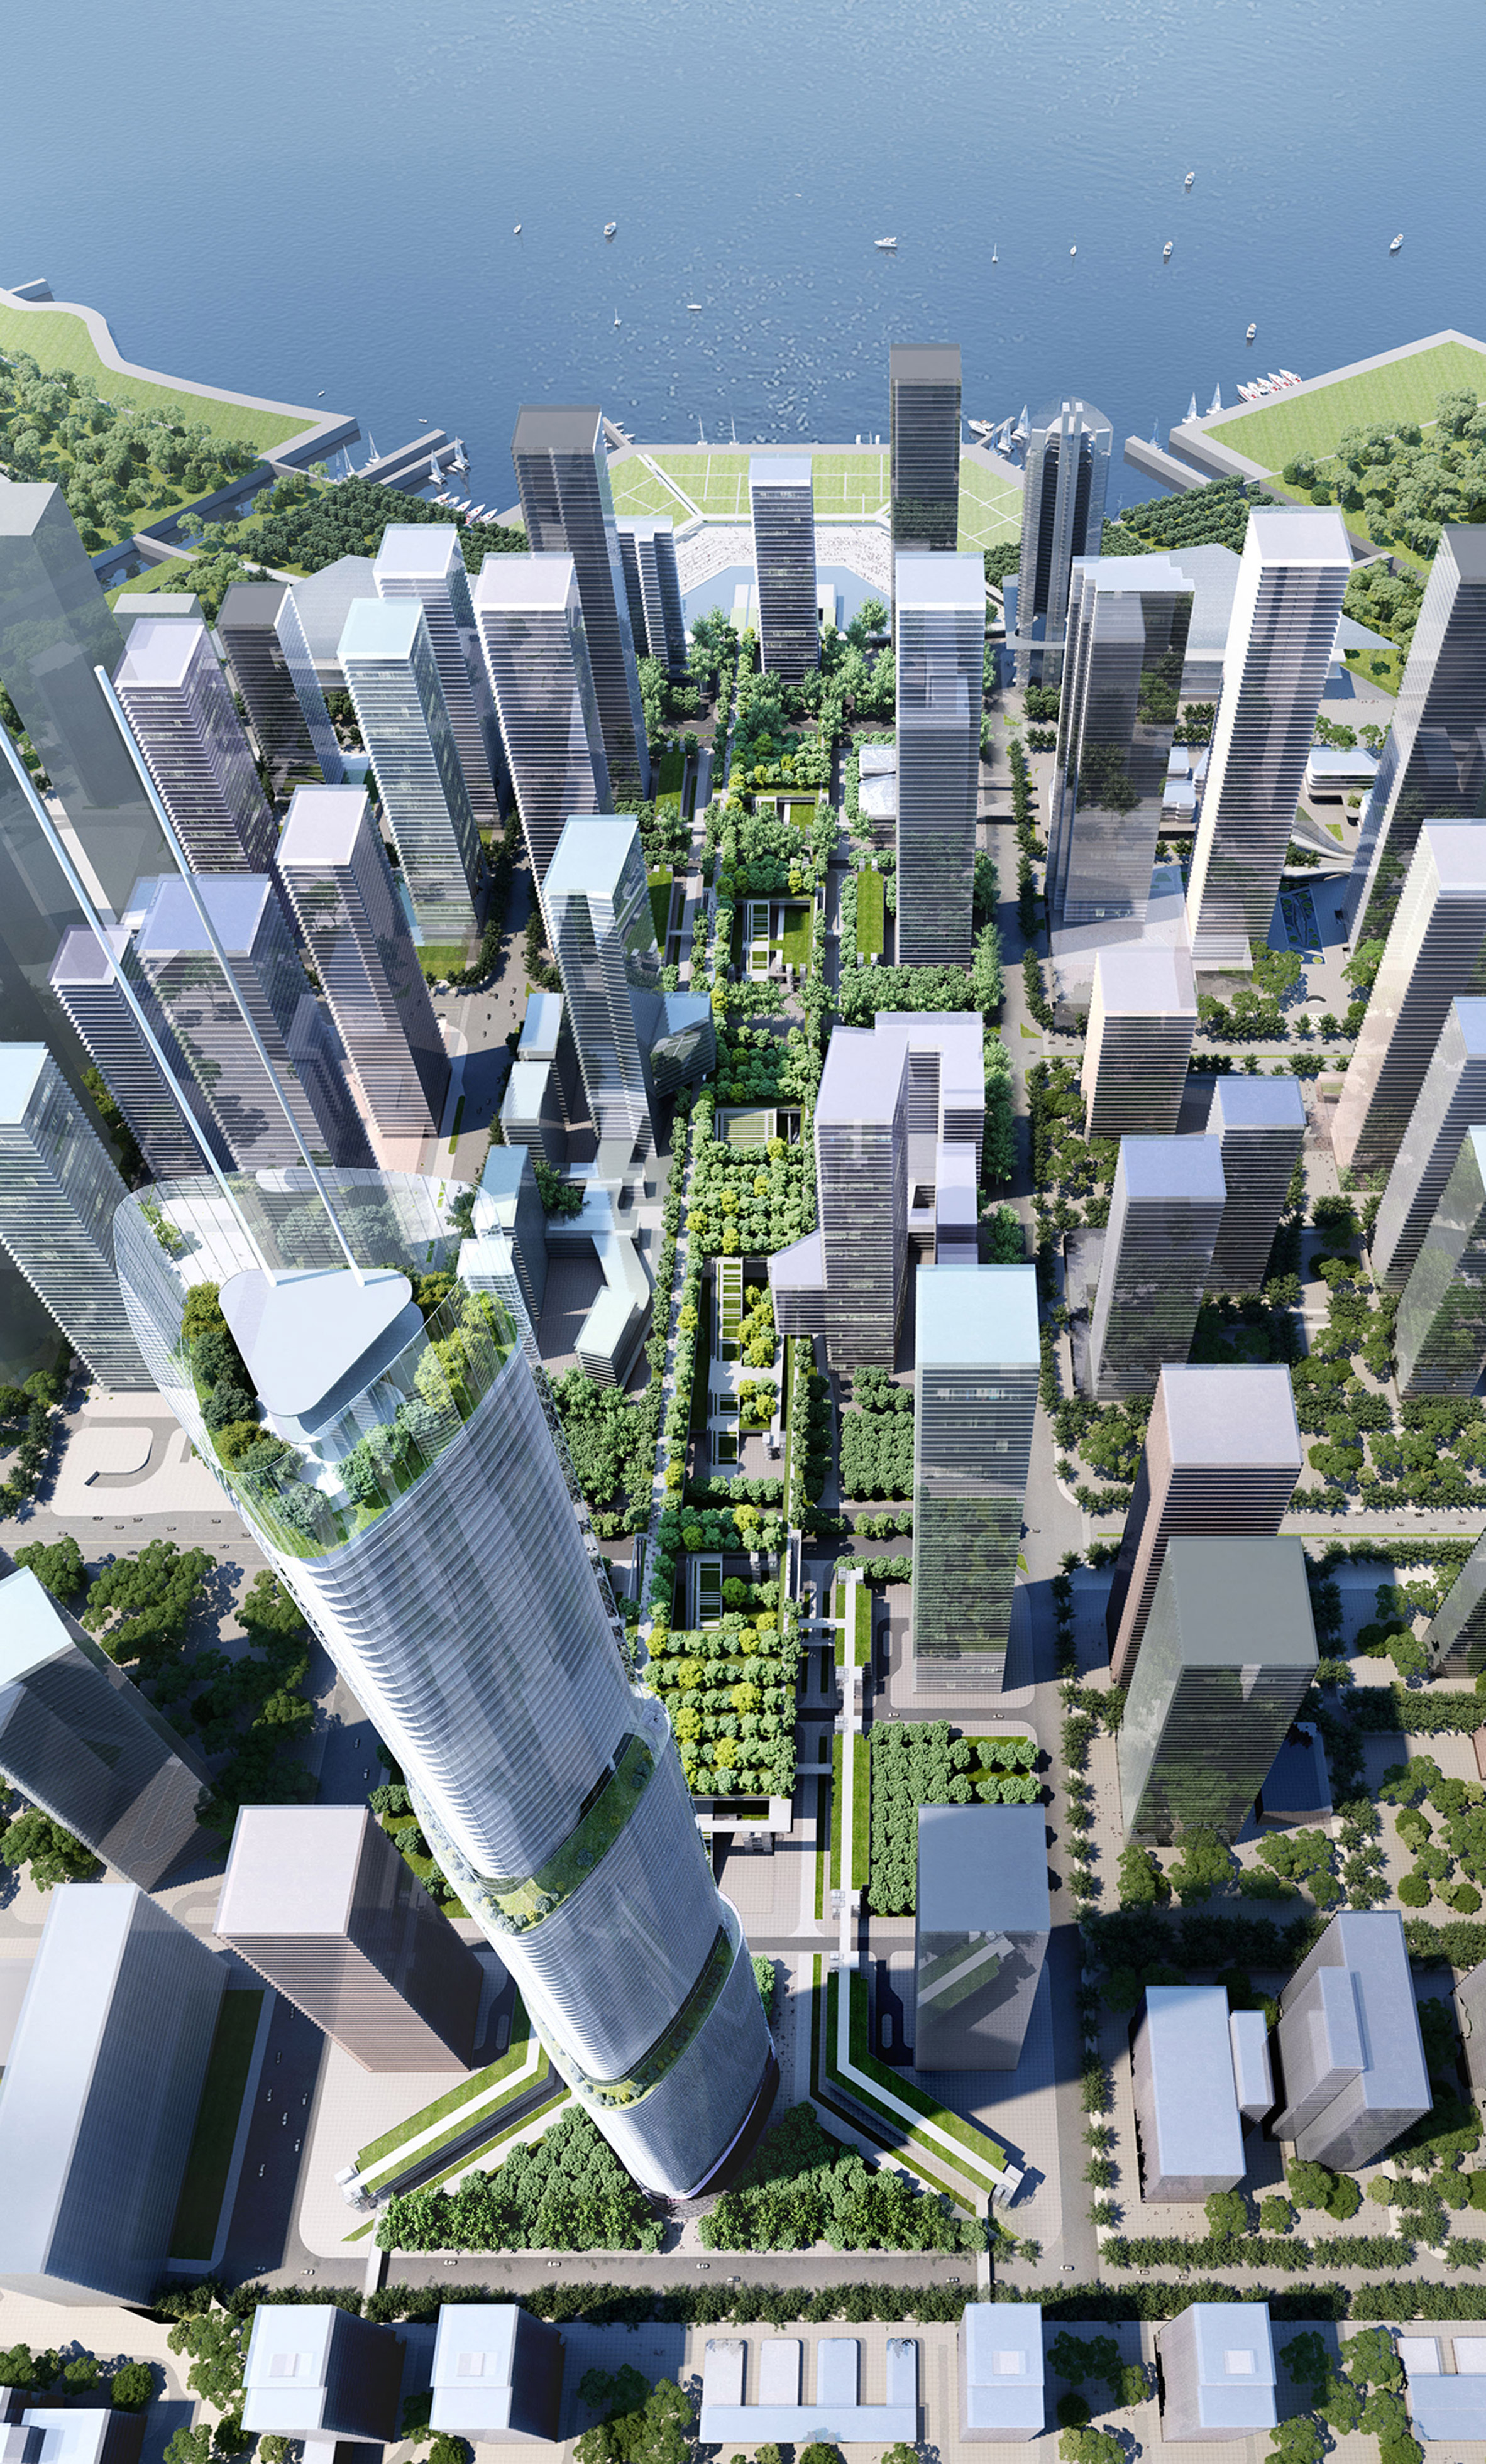 Qianhai masterplan by Rogers Stirk Harbour and Partners